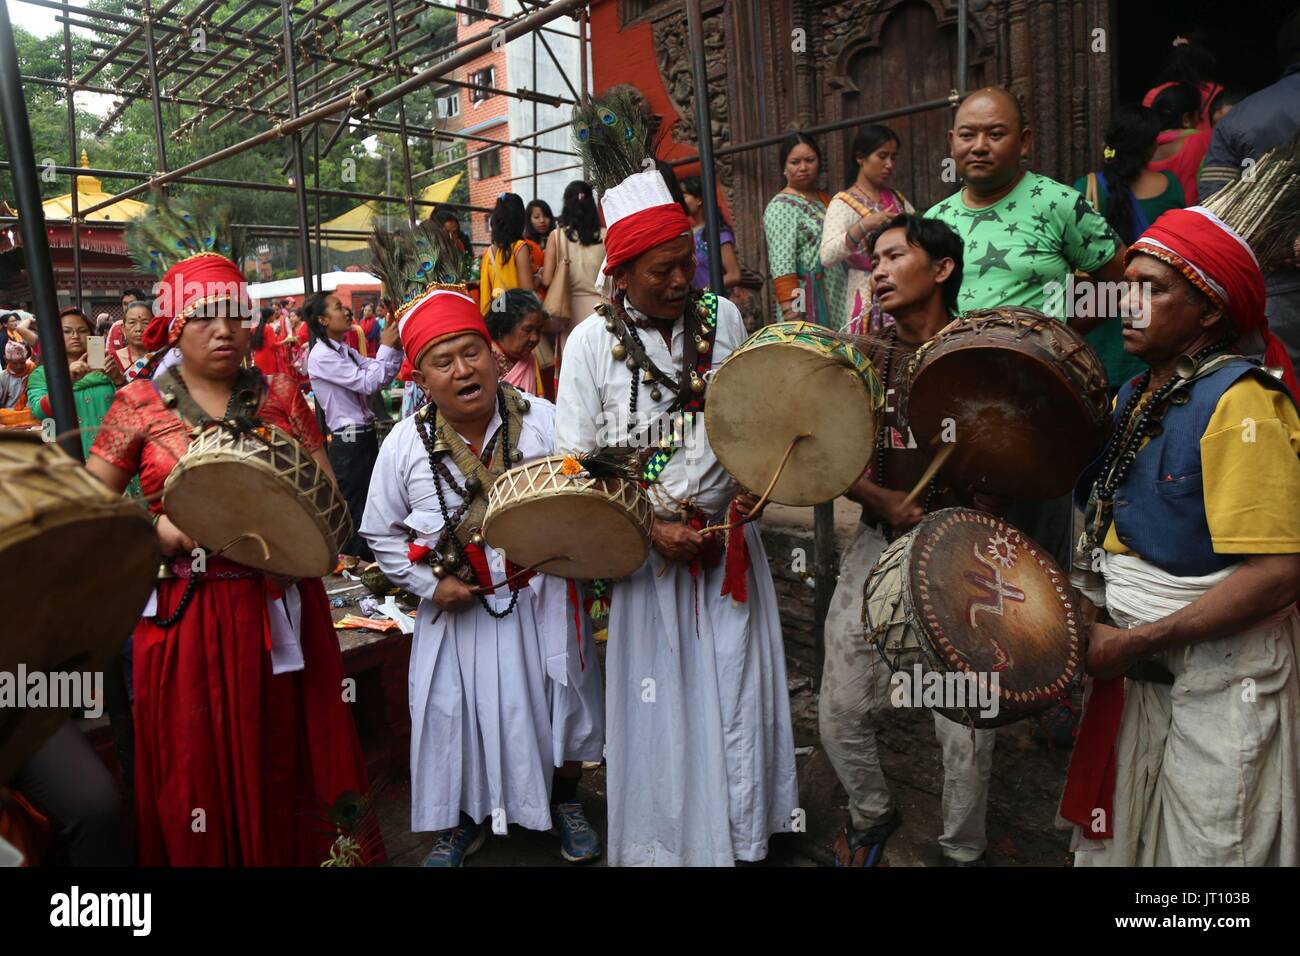 Lalitpur, Nepal. 7th Aug, 2017. Witch doctors perform religious rituals during Purnima festival at Kumbheshwor temple in Lalitpur, Nepal, on Aug. 7, 2017. Credit: Sunil Sharma/Xinhua/Alamy Live News Stock Photo